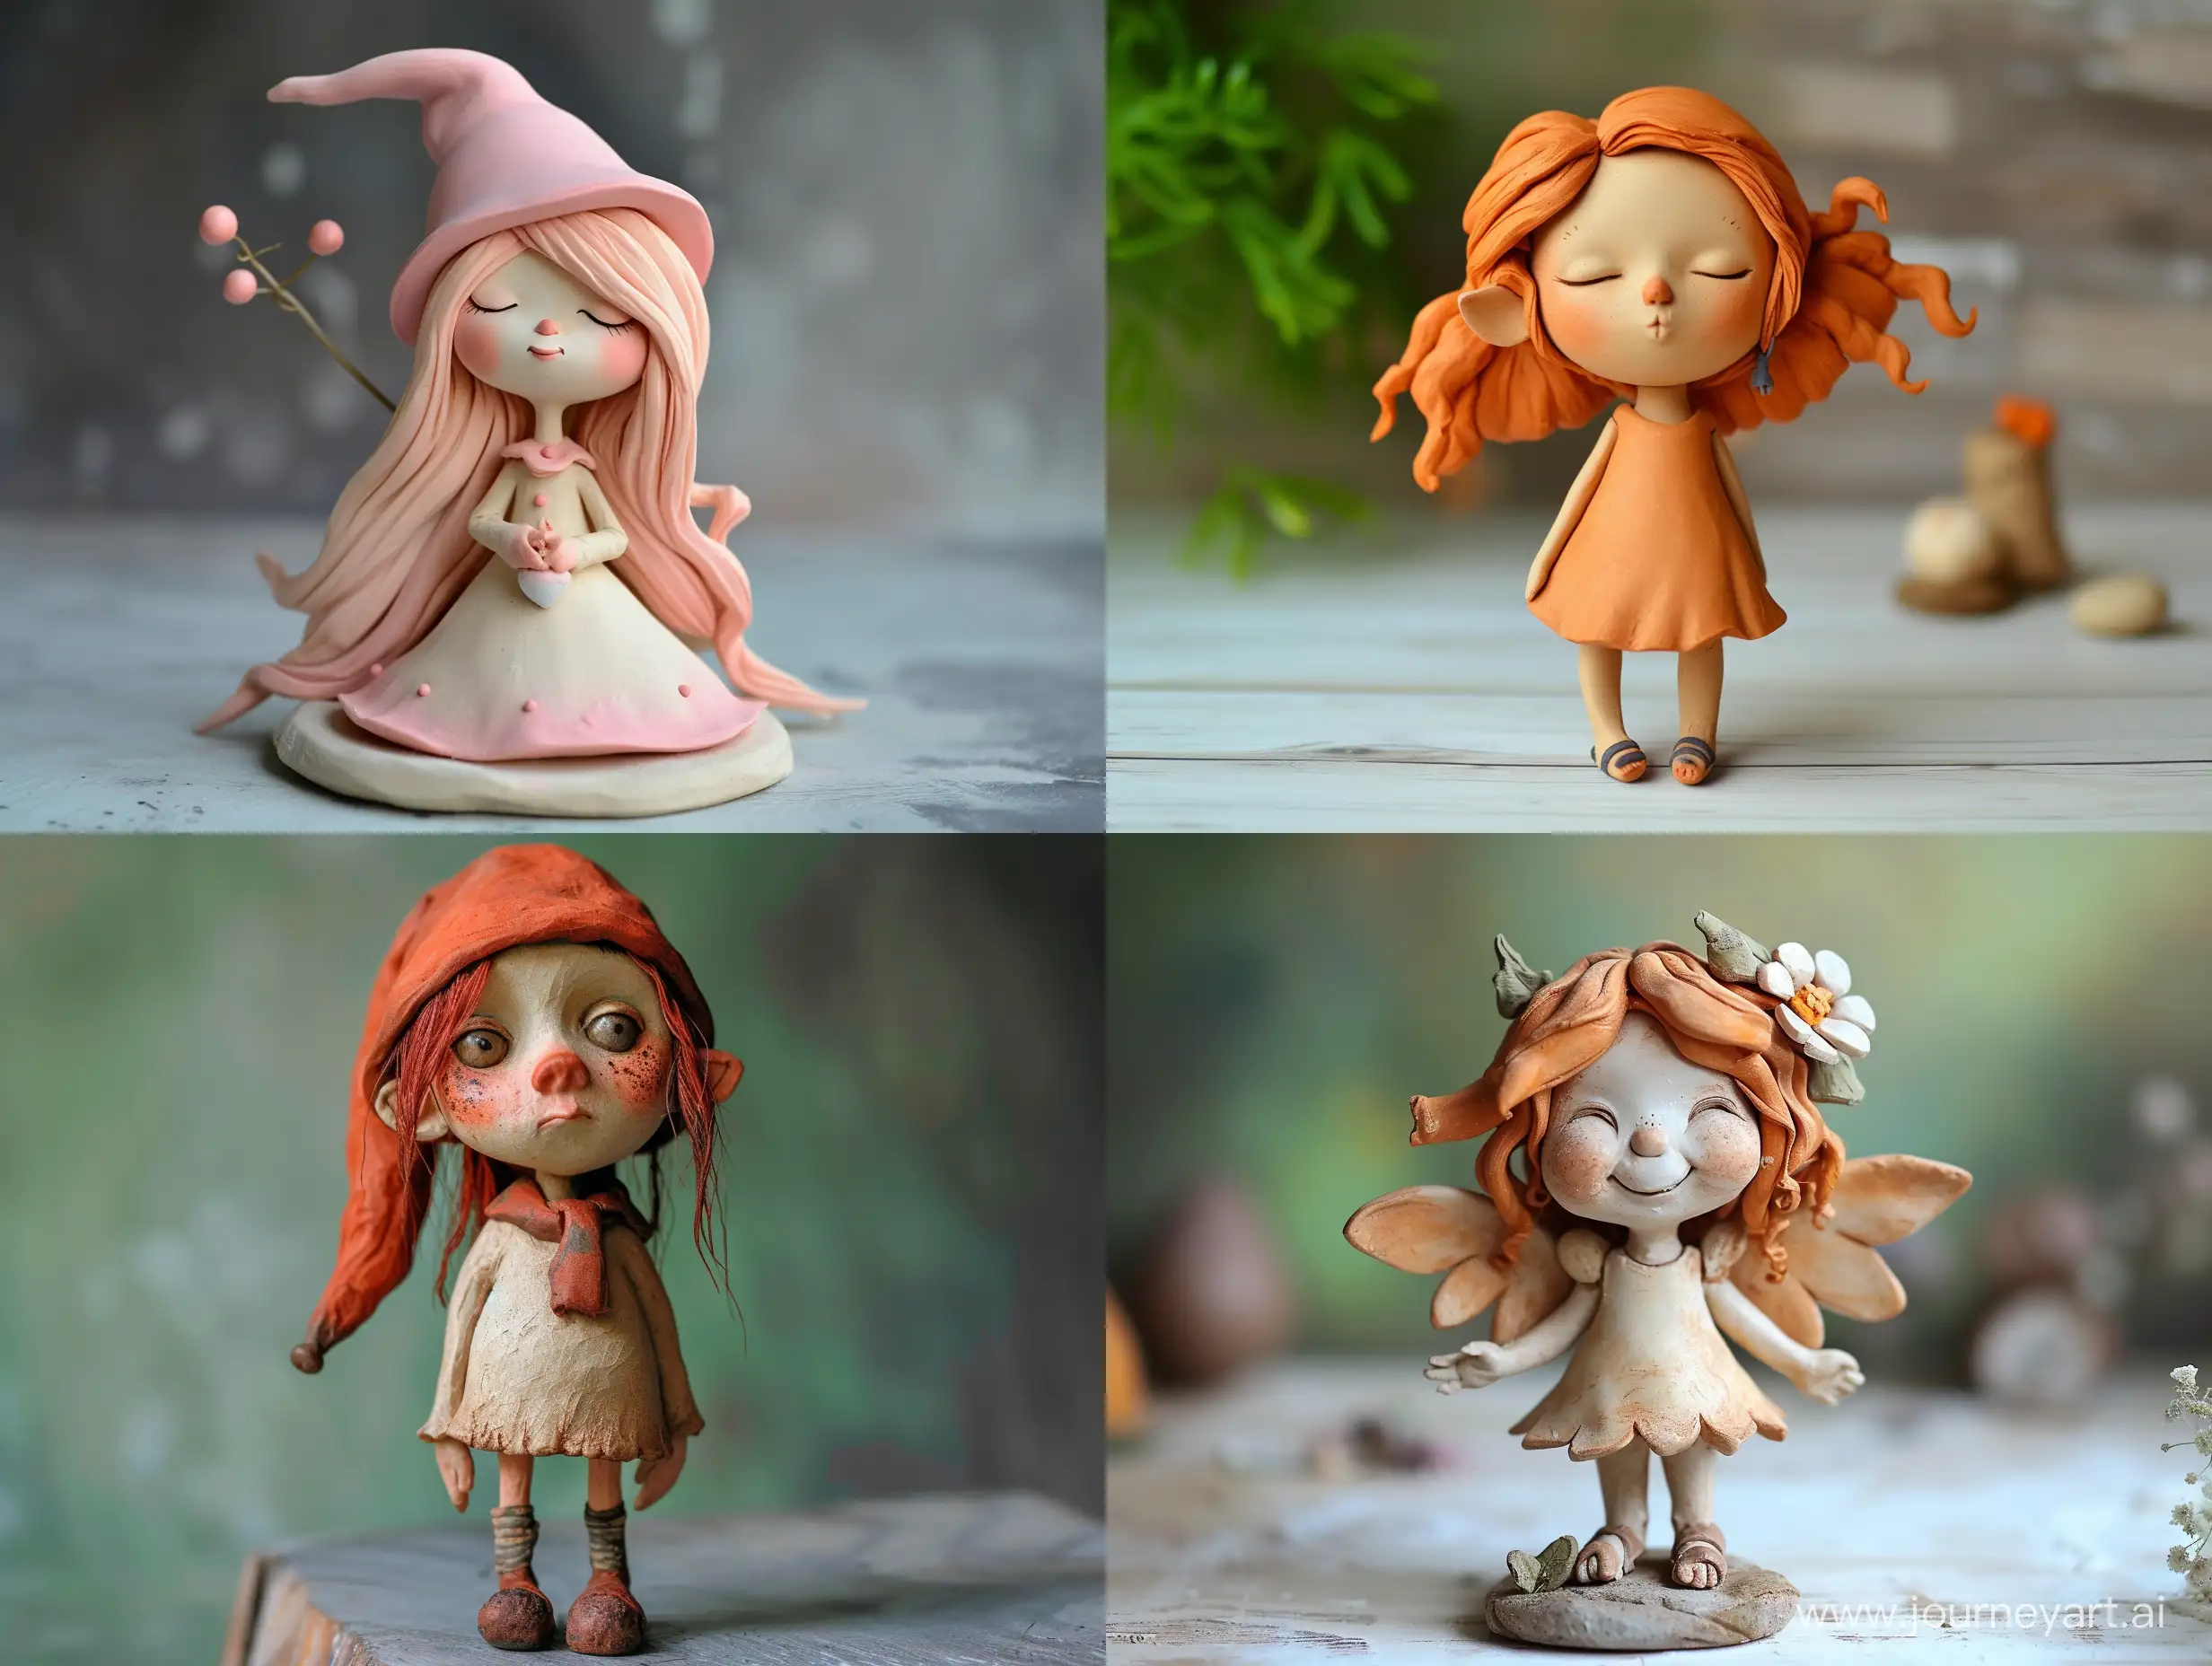 Enchanting-Clay-Art-Imaginary-FairyTale-Character-Statuette